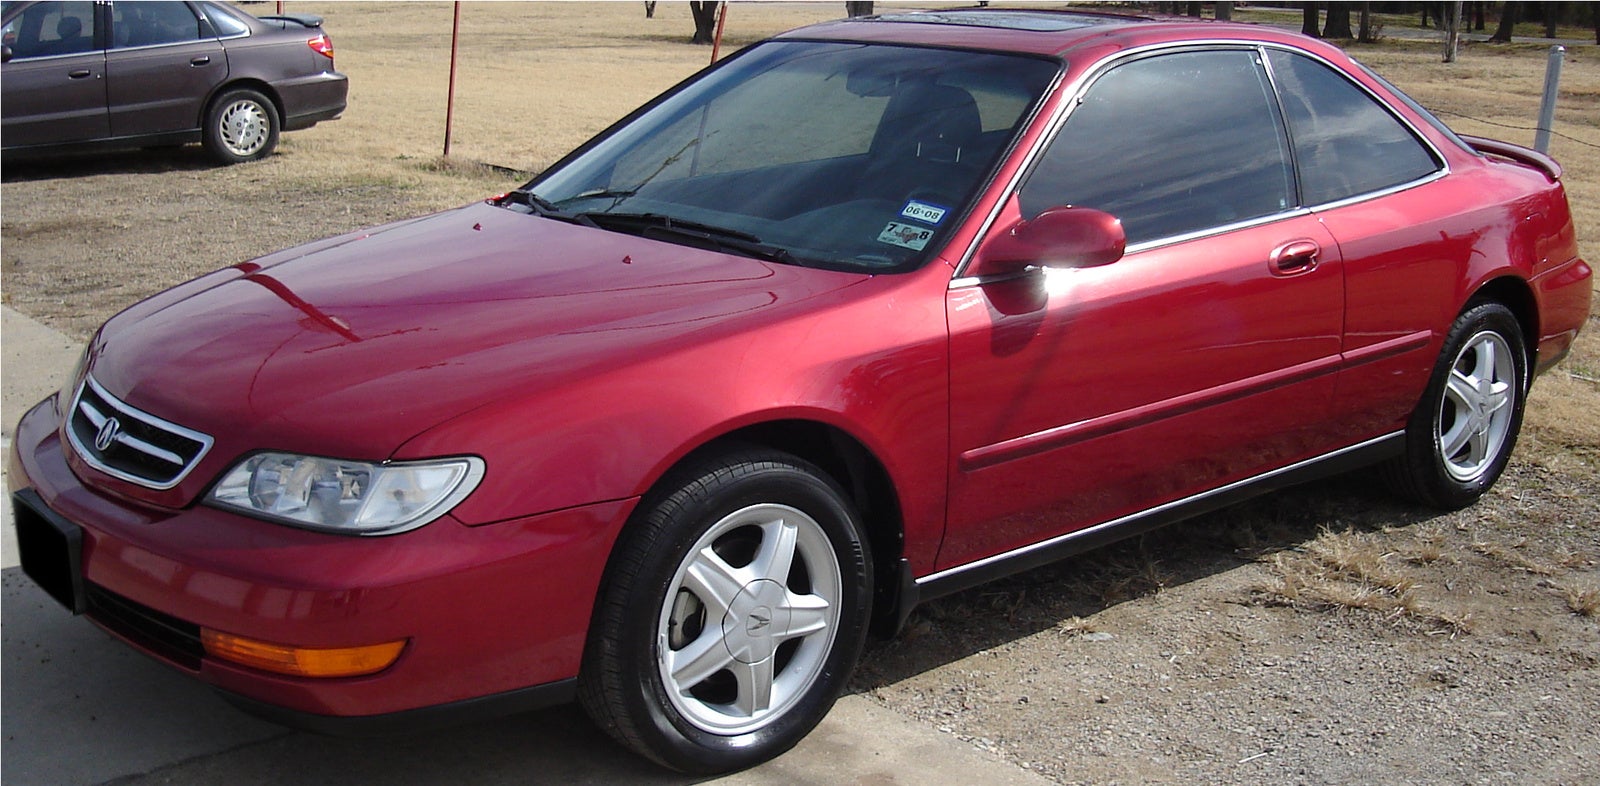 1997 Acura CL 2 Dr 3.0 Premium Coupe - Pictures - 1997 Acura CL 2 Dr 3 ...